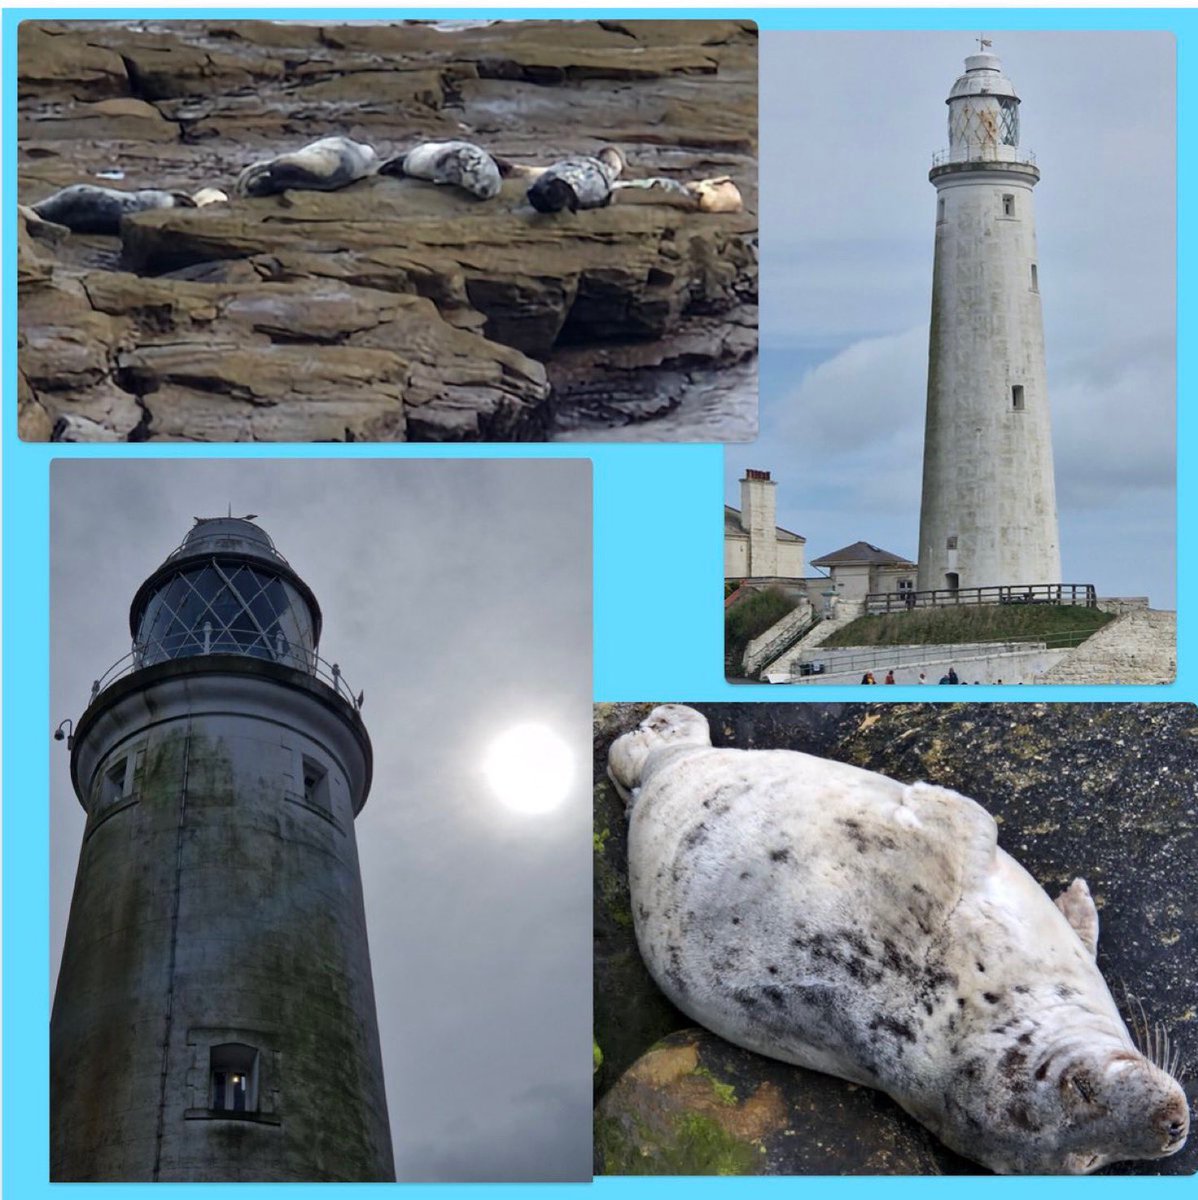 #GoodAfternoon  #TwitterFriends  doing a bit deleting from photo library and came across my lovely new friend post from down Whitley Bay last week. Giving it another show before it goes. 🥰 #DayOut  #StMarysLighthouse  #youngseal  #LovelyDay